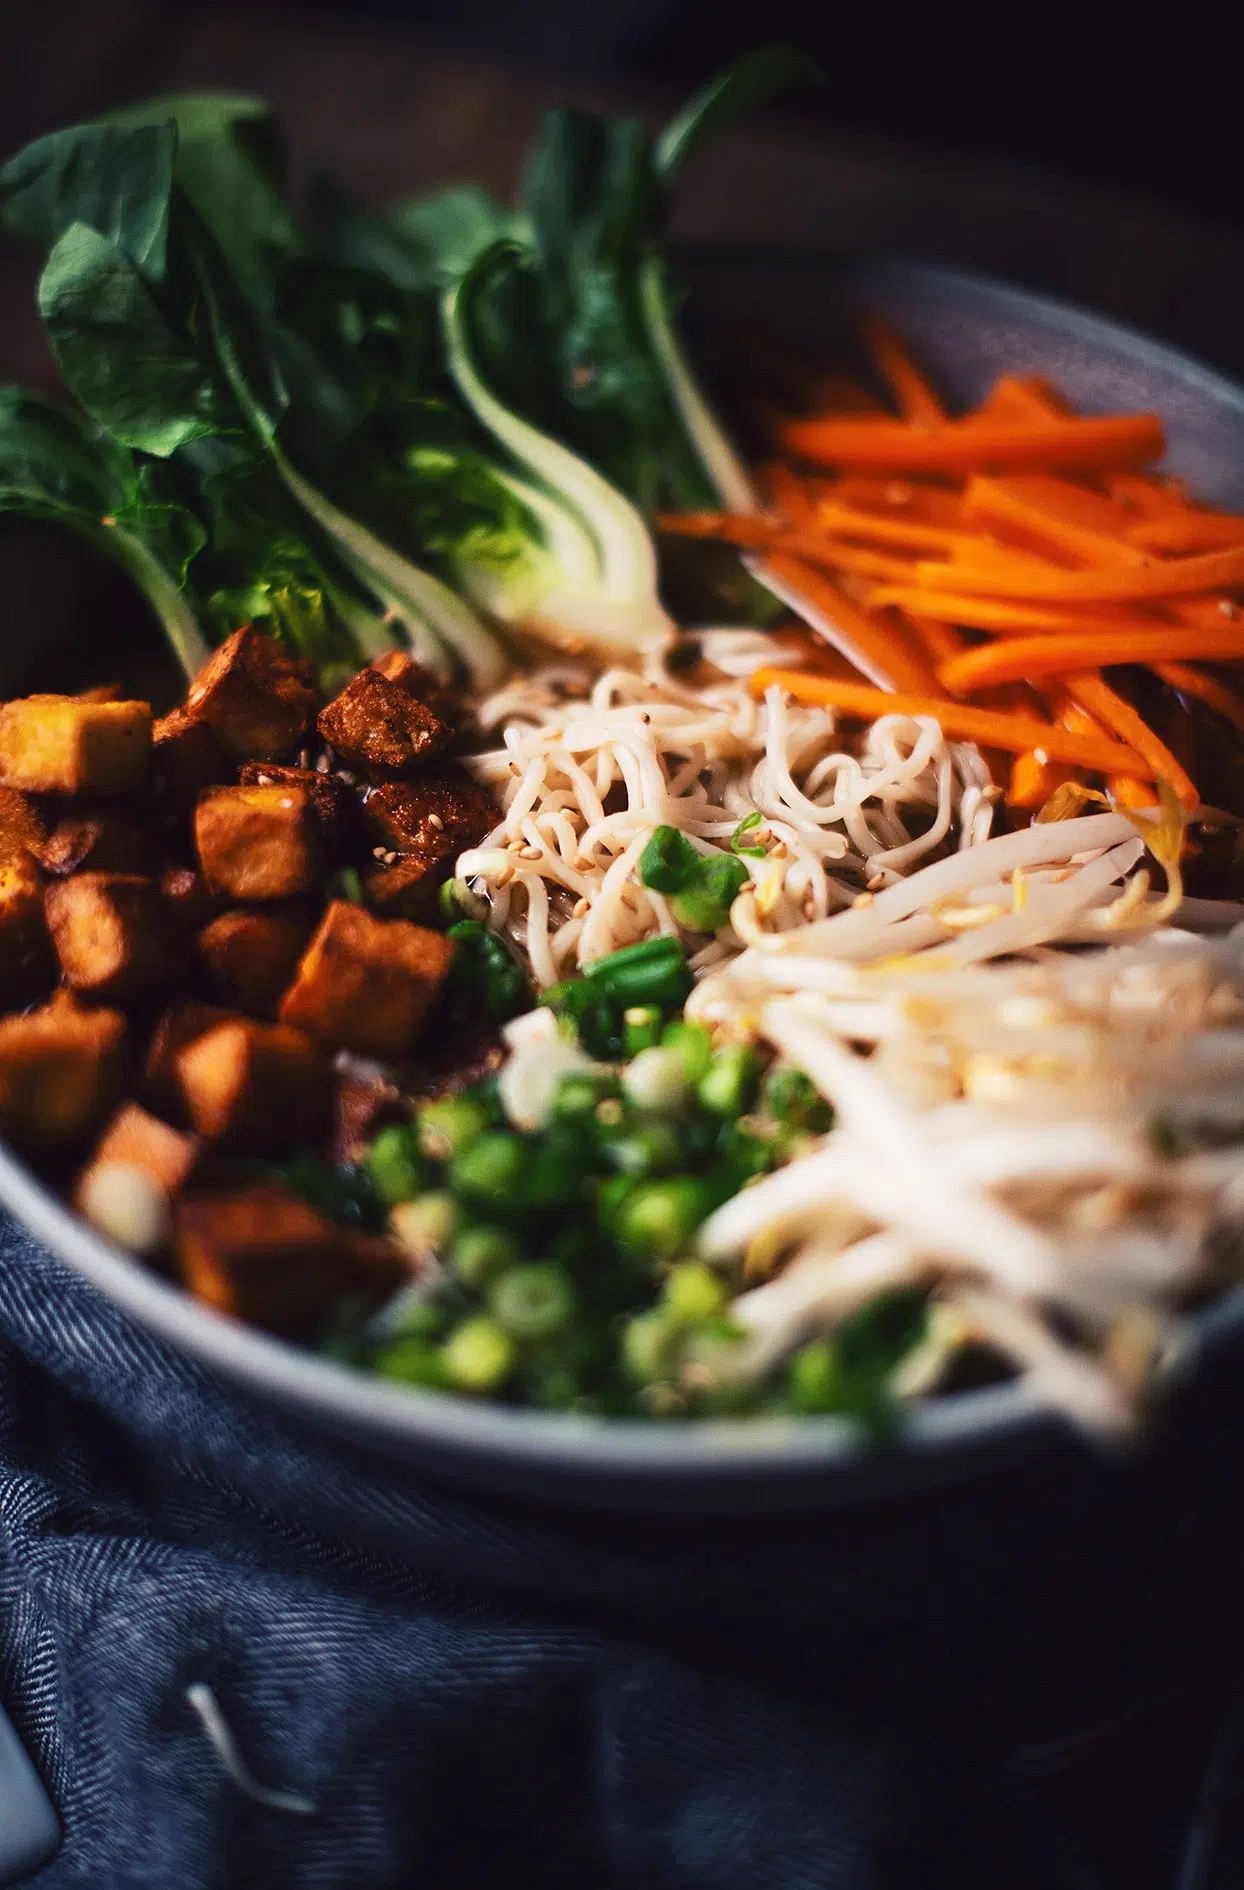 Miso ramen soup with mushrooms, vegetables and crispy tofu